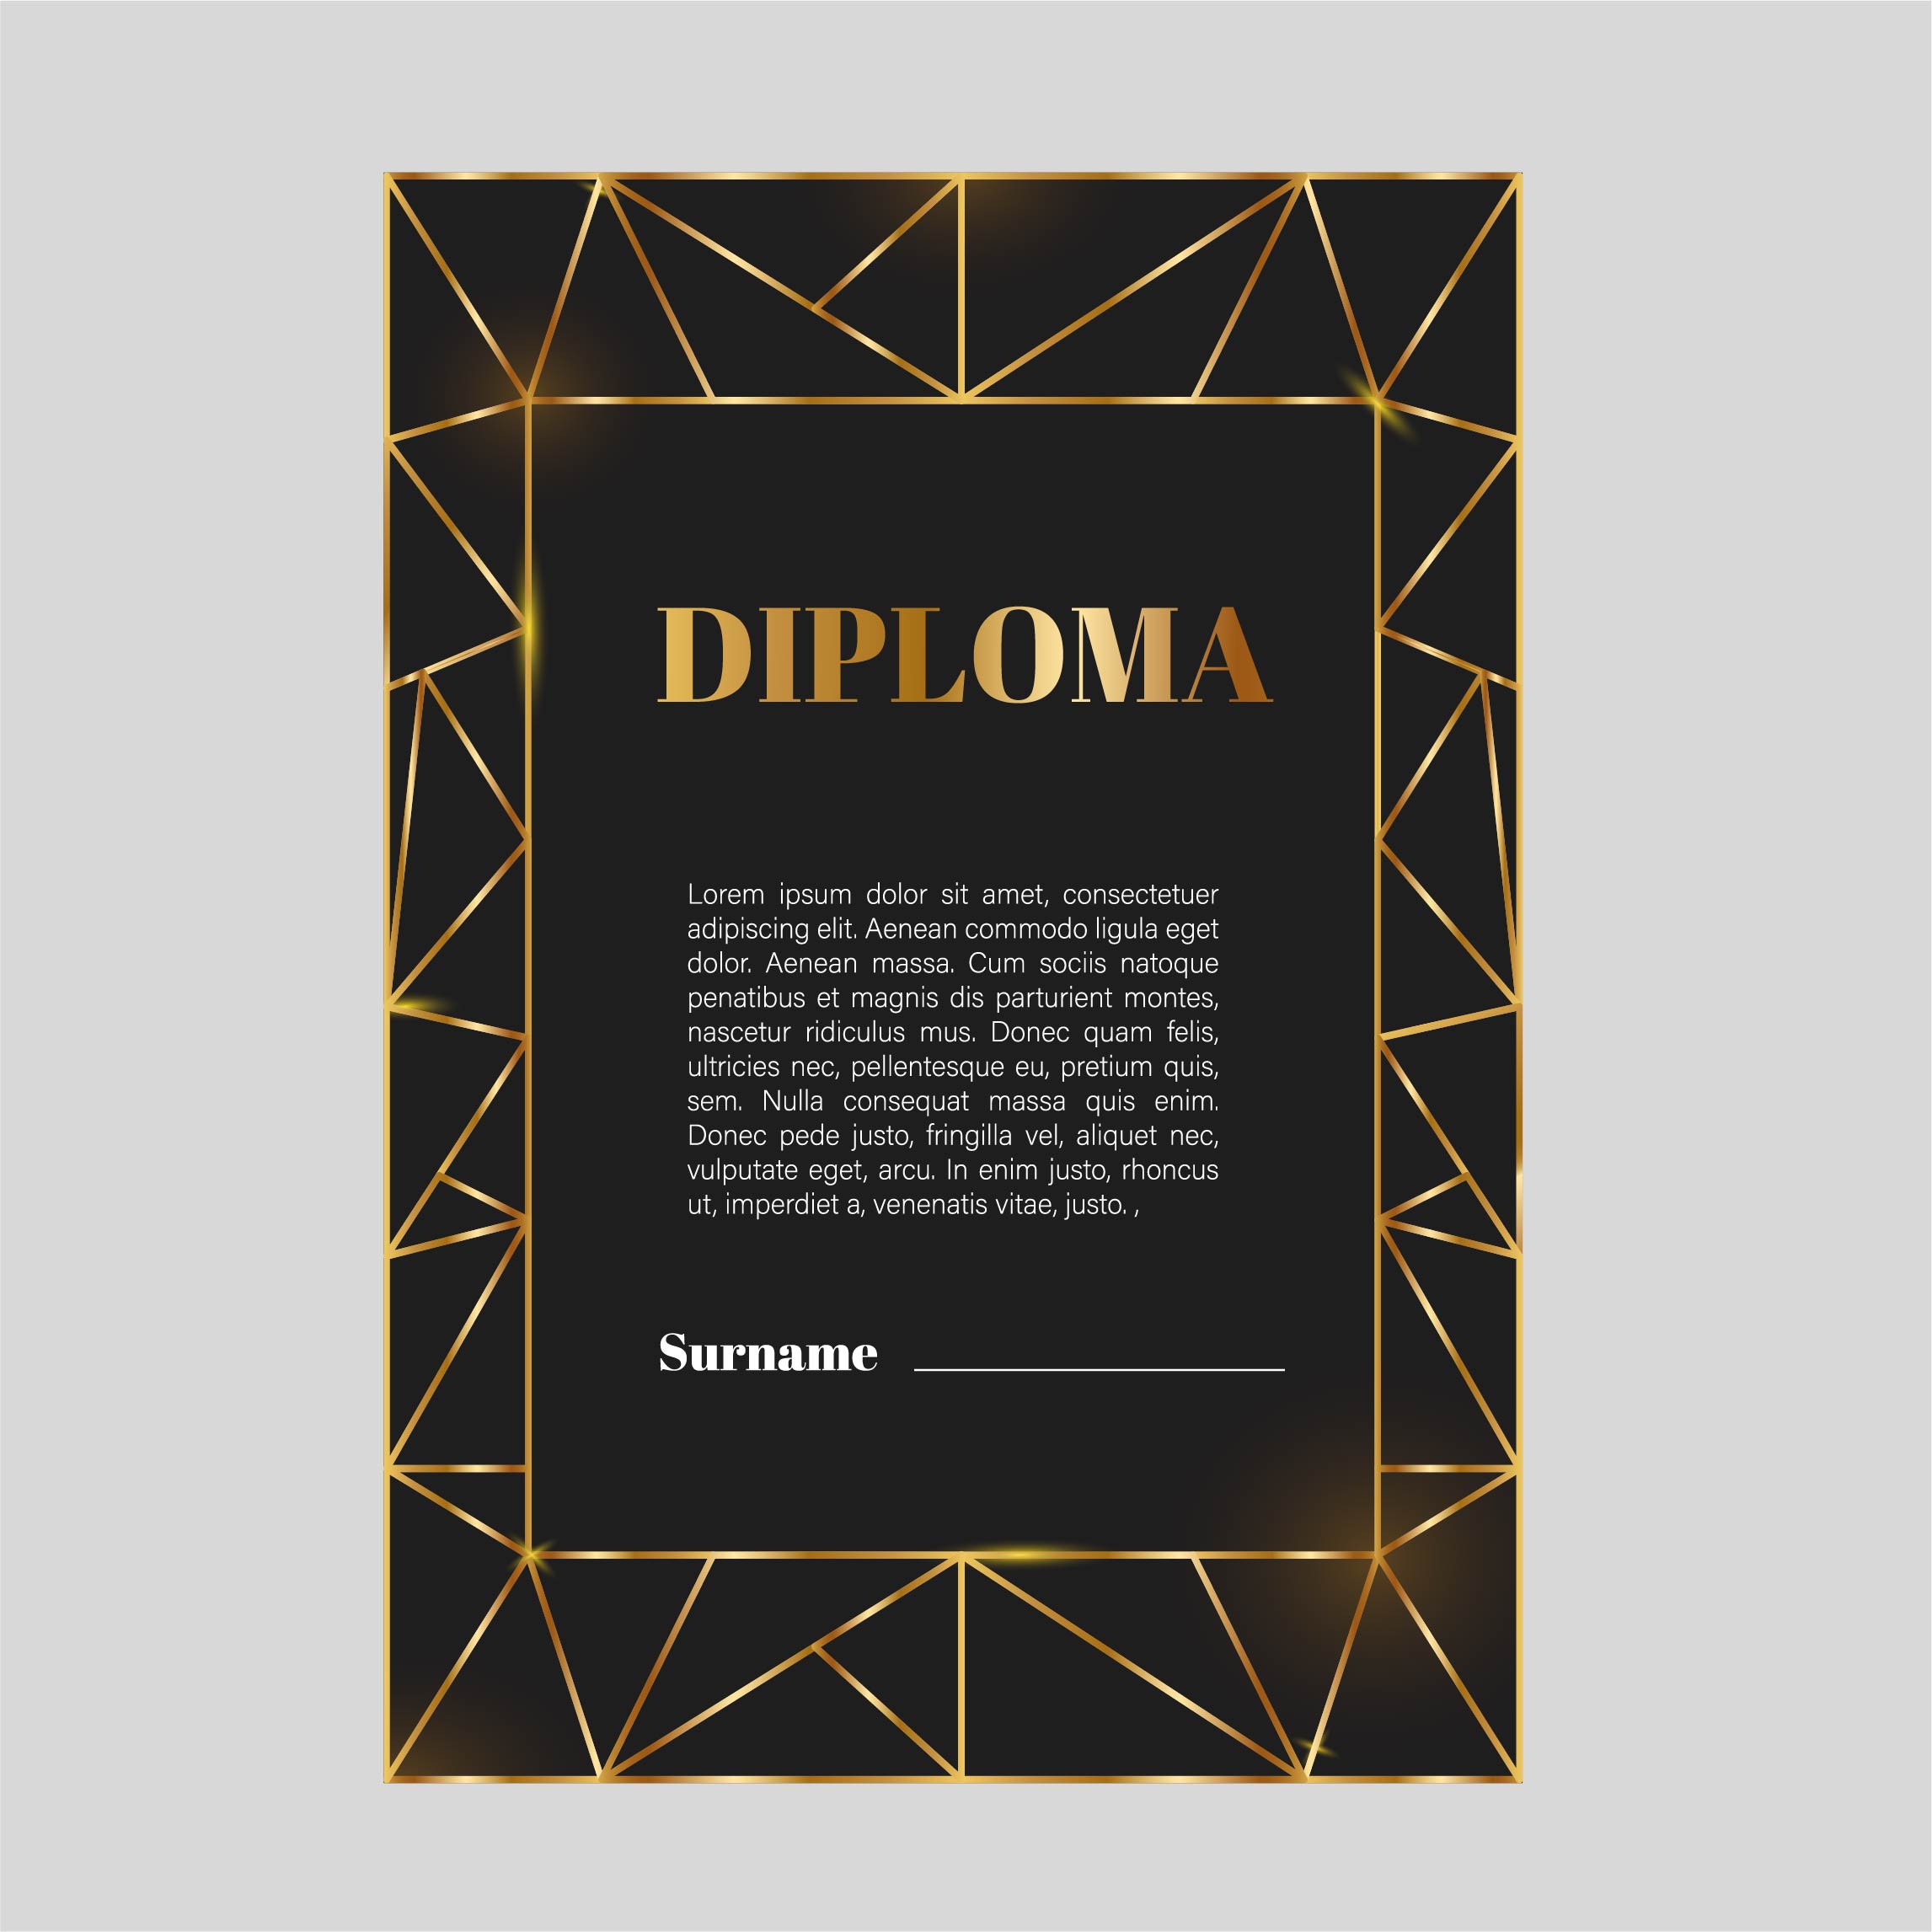 Certificate or diploma template on black background cover image.